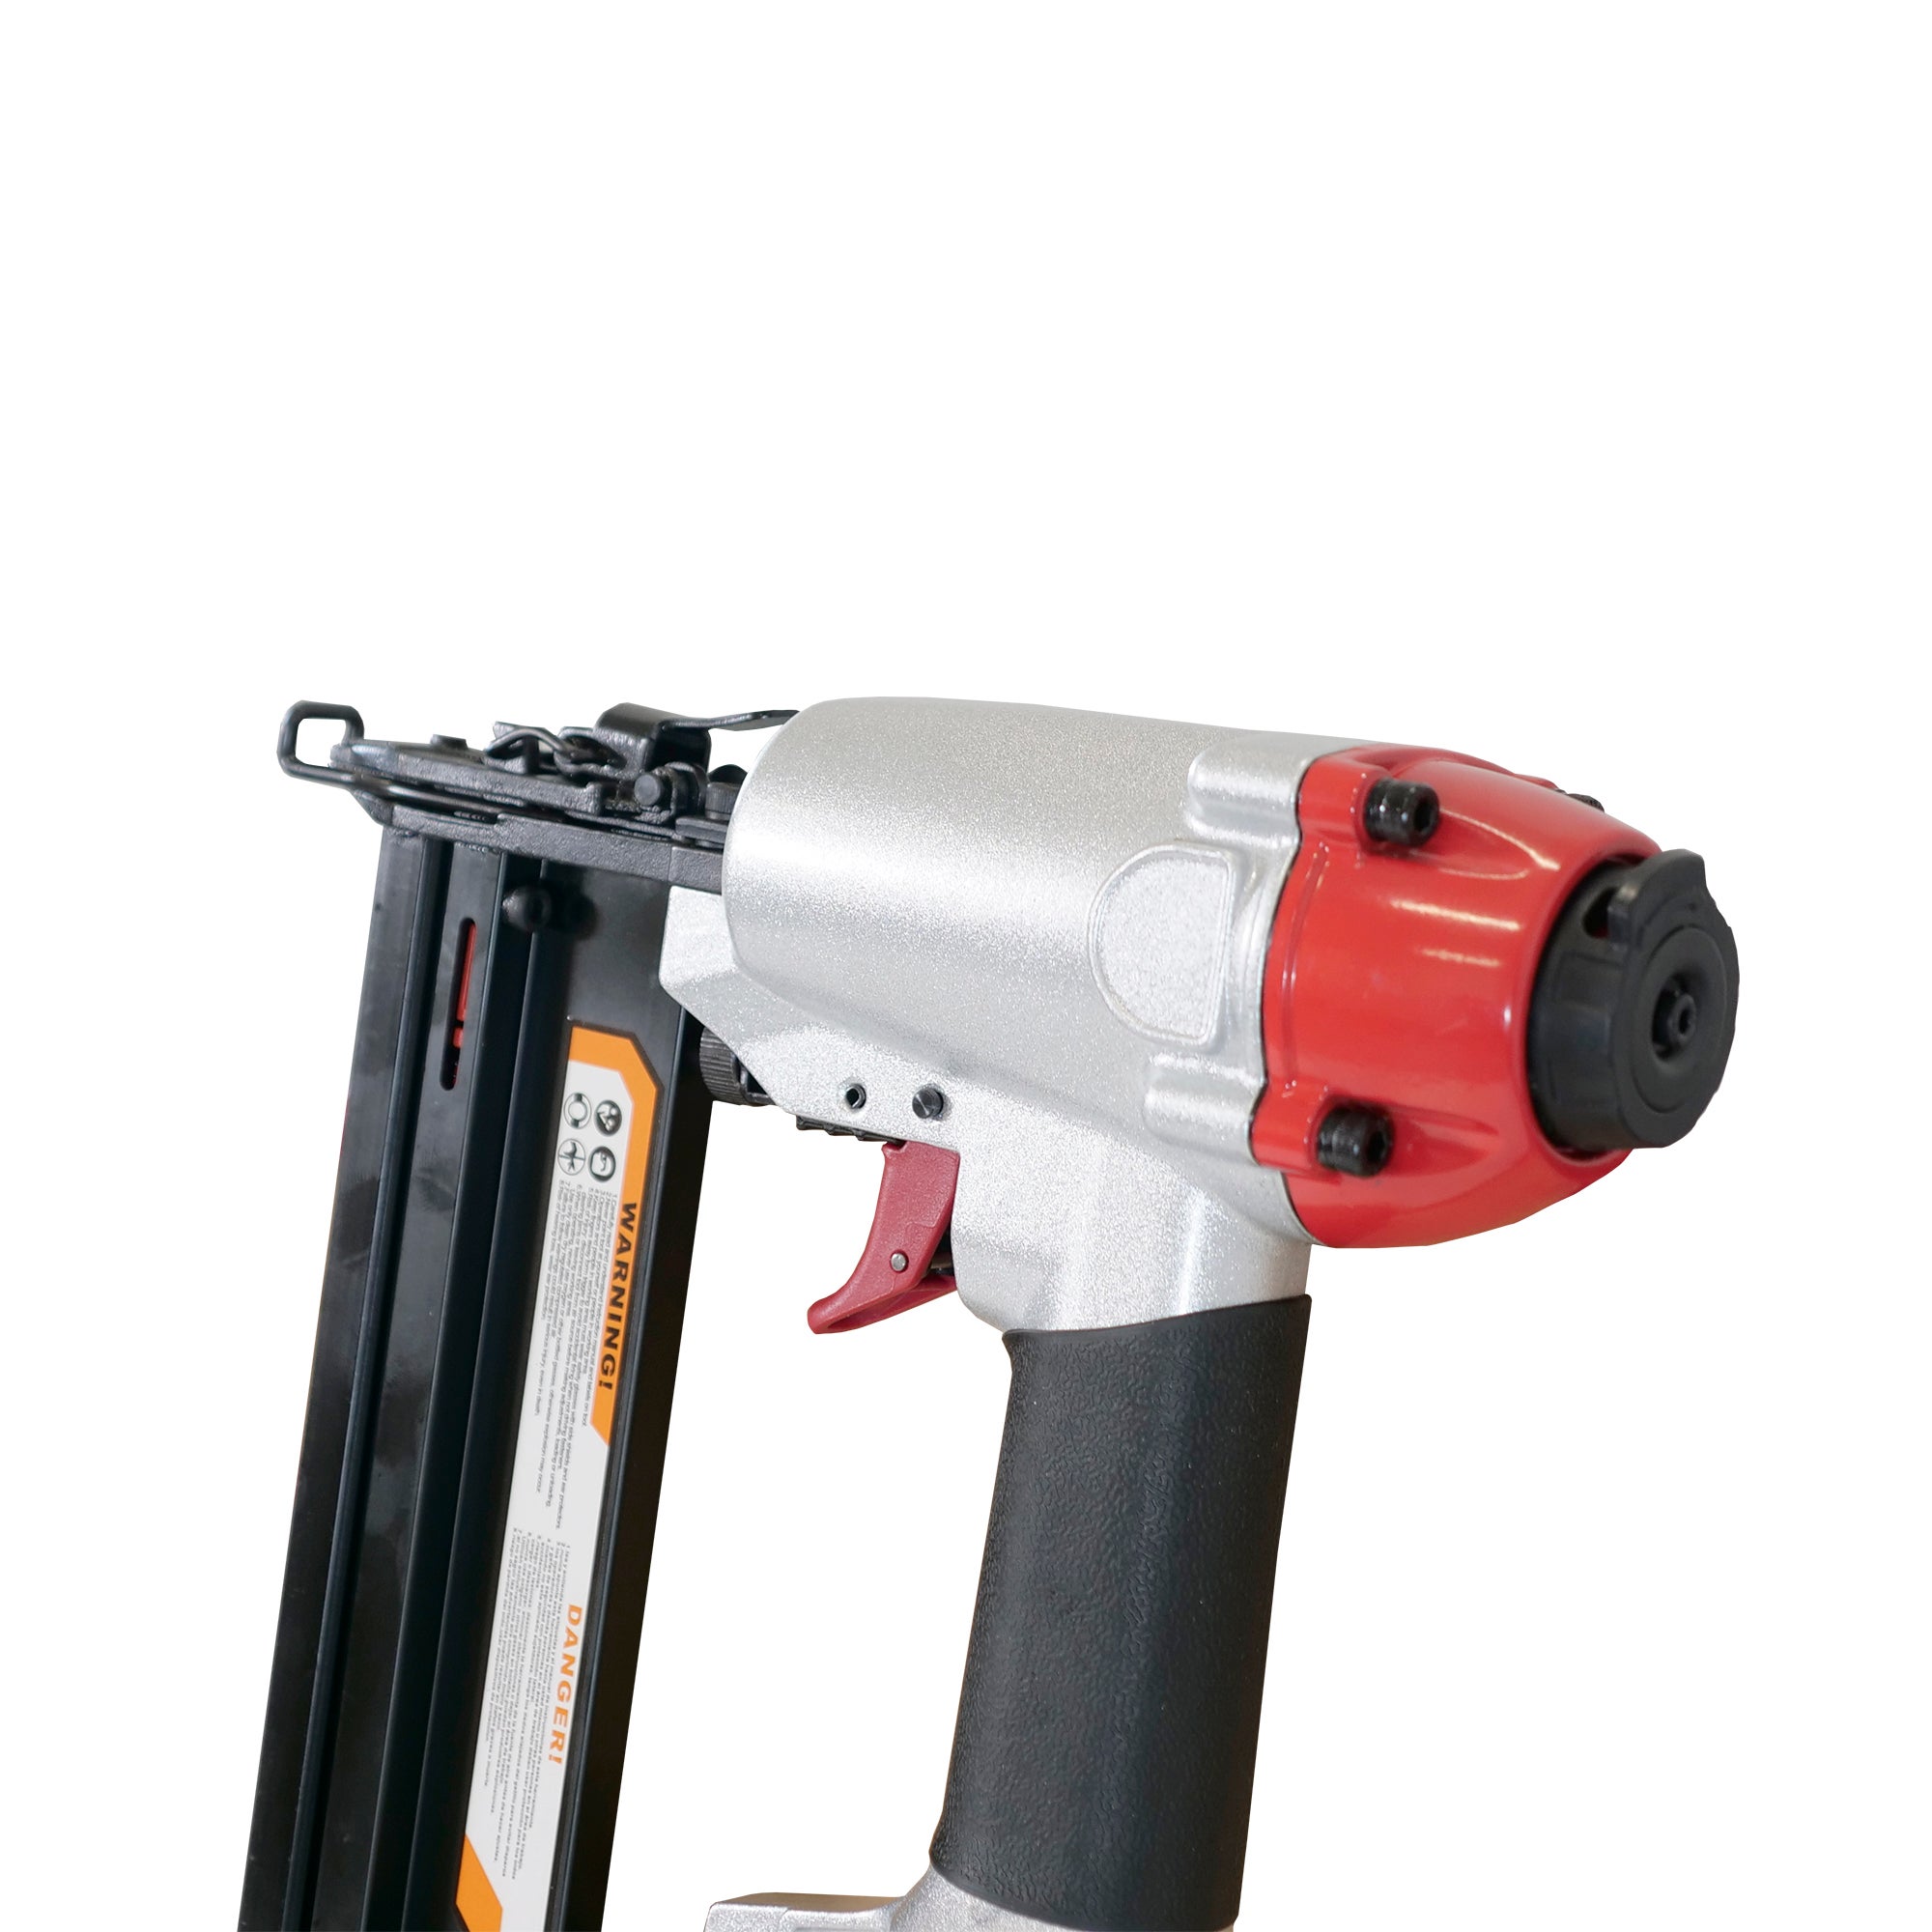 What is gauge nail gun should be used for baseboard and door trim work? -  Quora